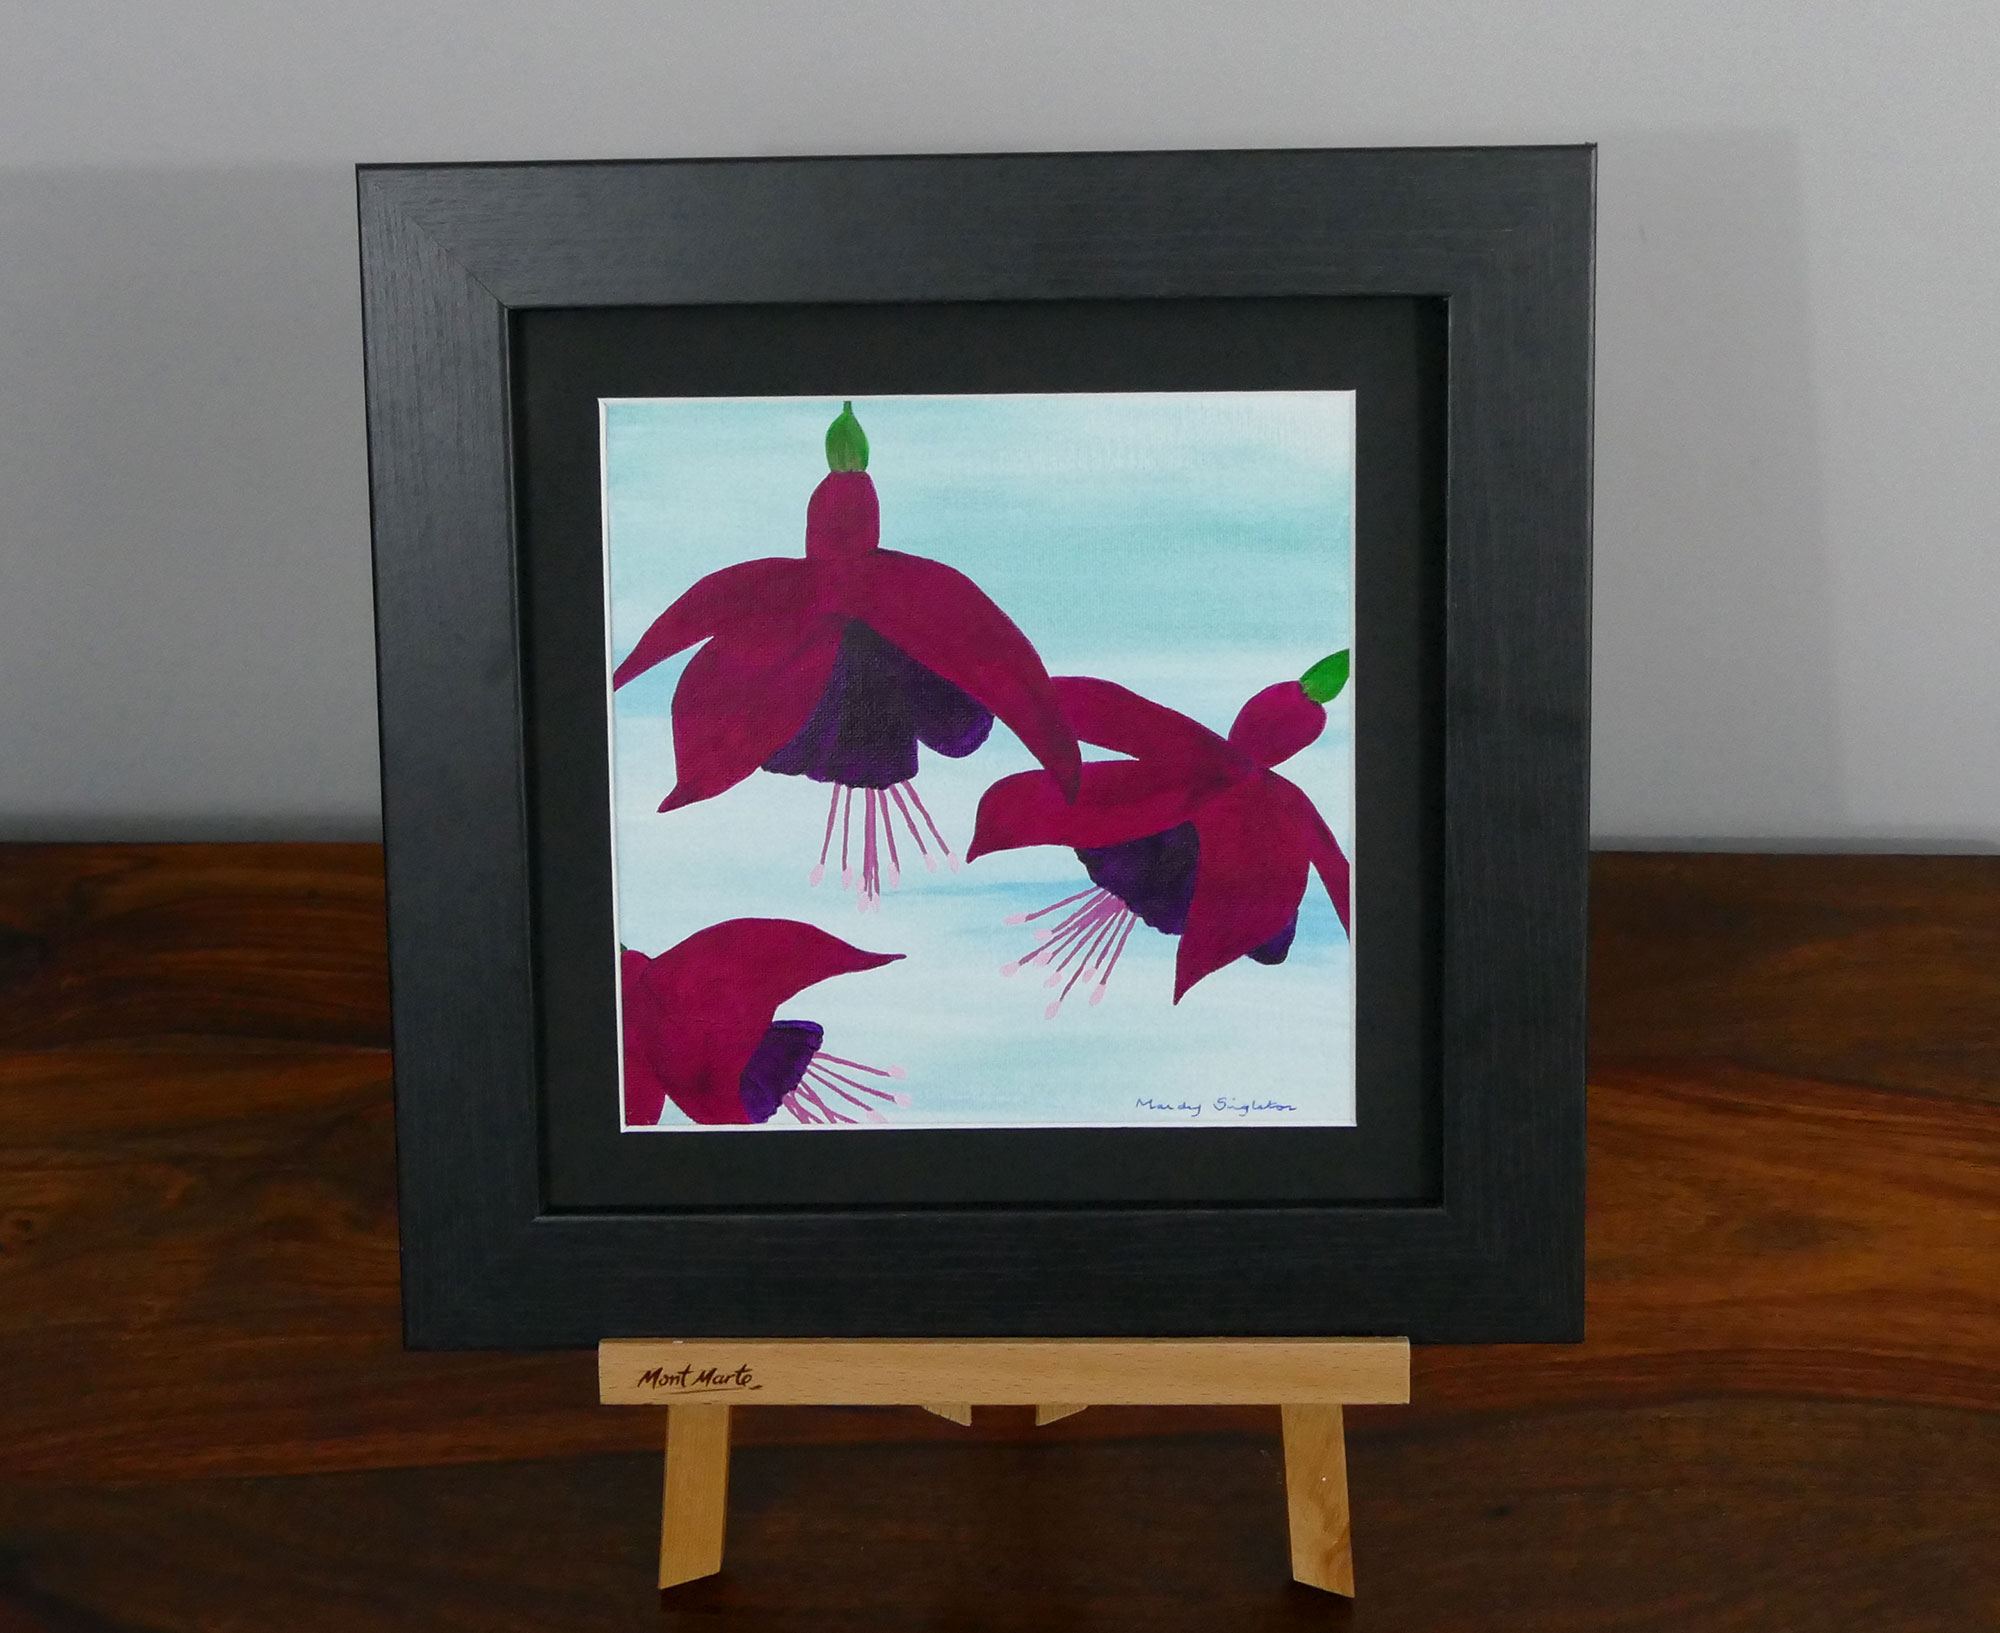 Fuchsia acrylic painting, available to purchase